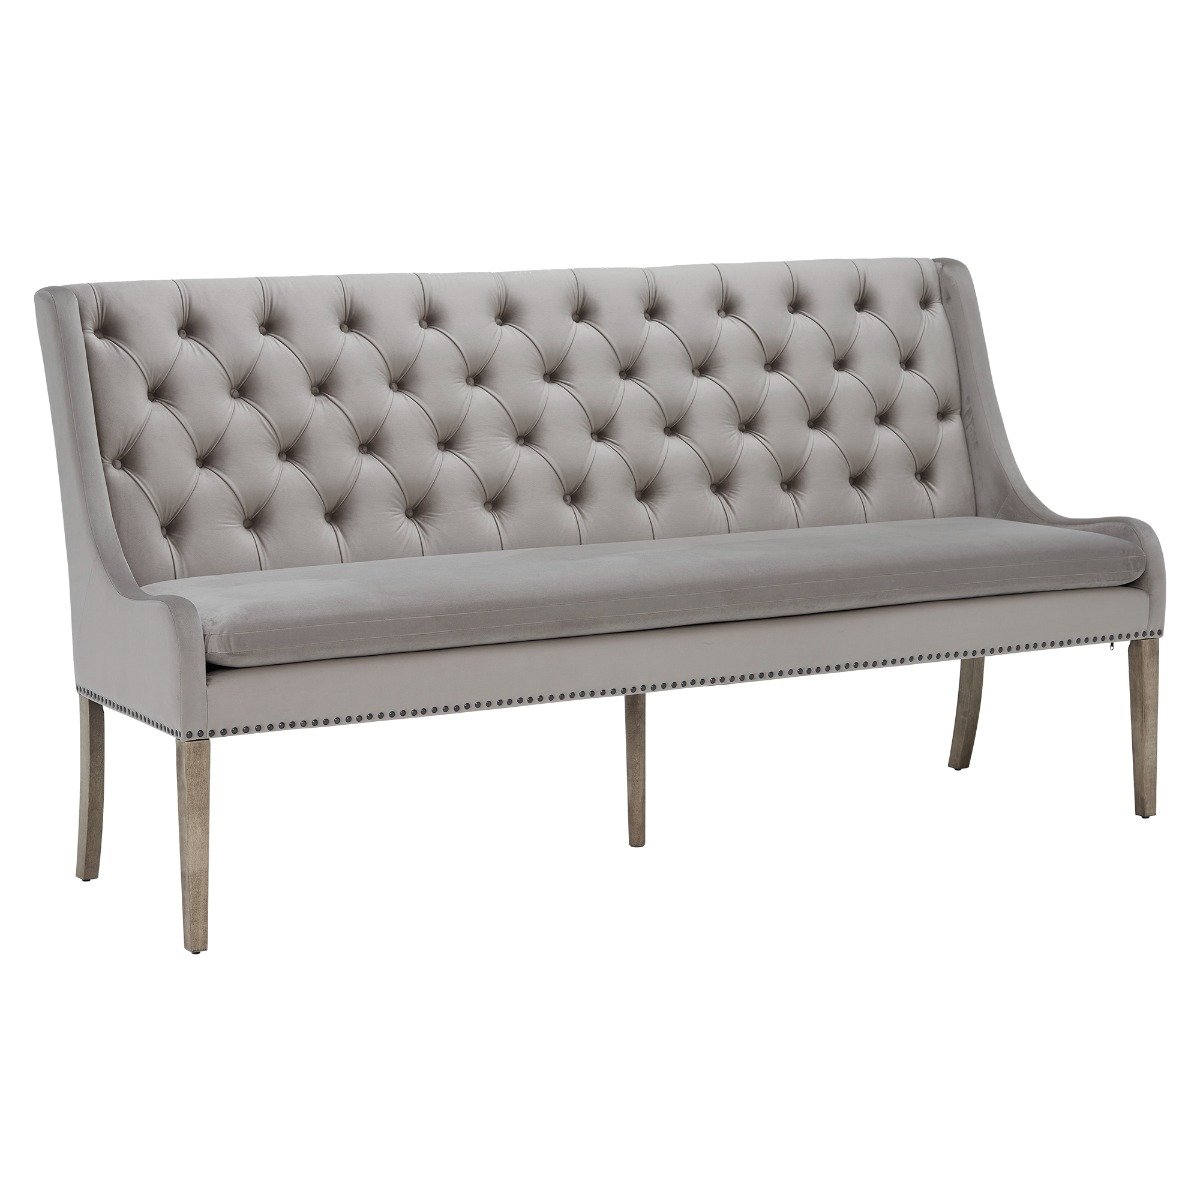 Ophelia Buttoned Back Bench 200cm, Black | Barker & Stonehouse